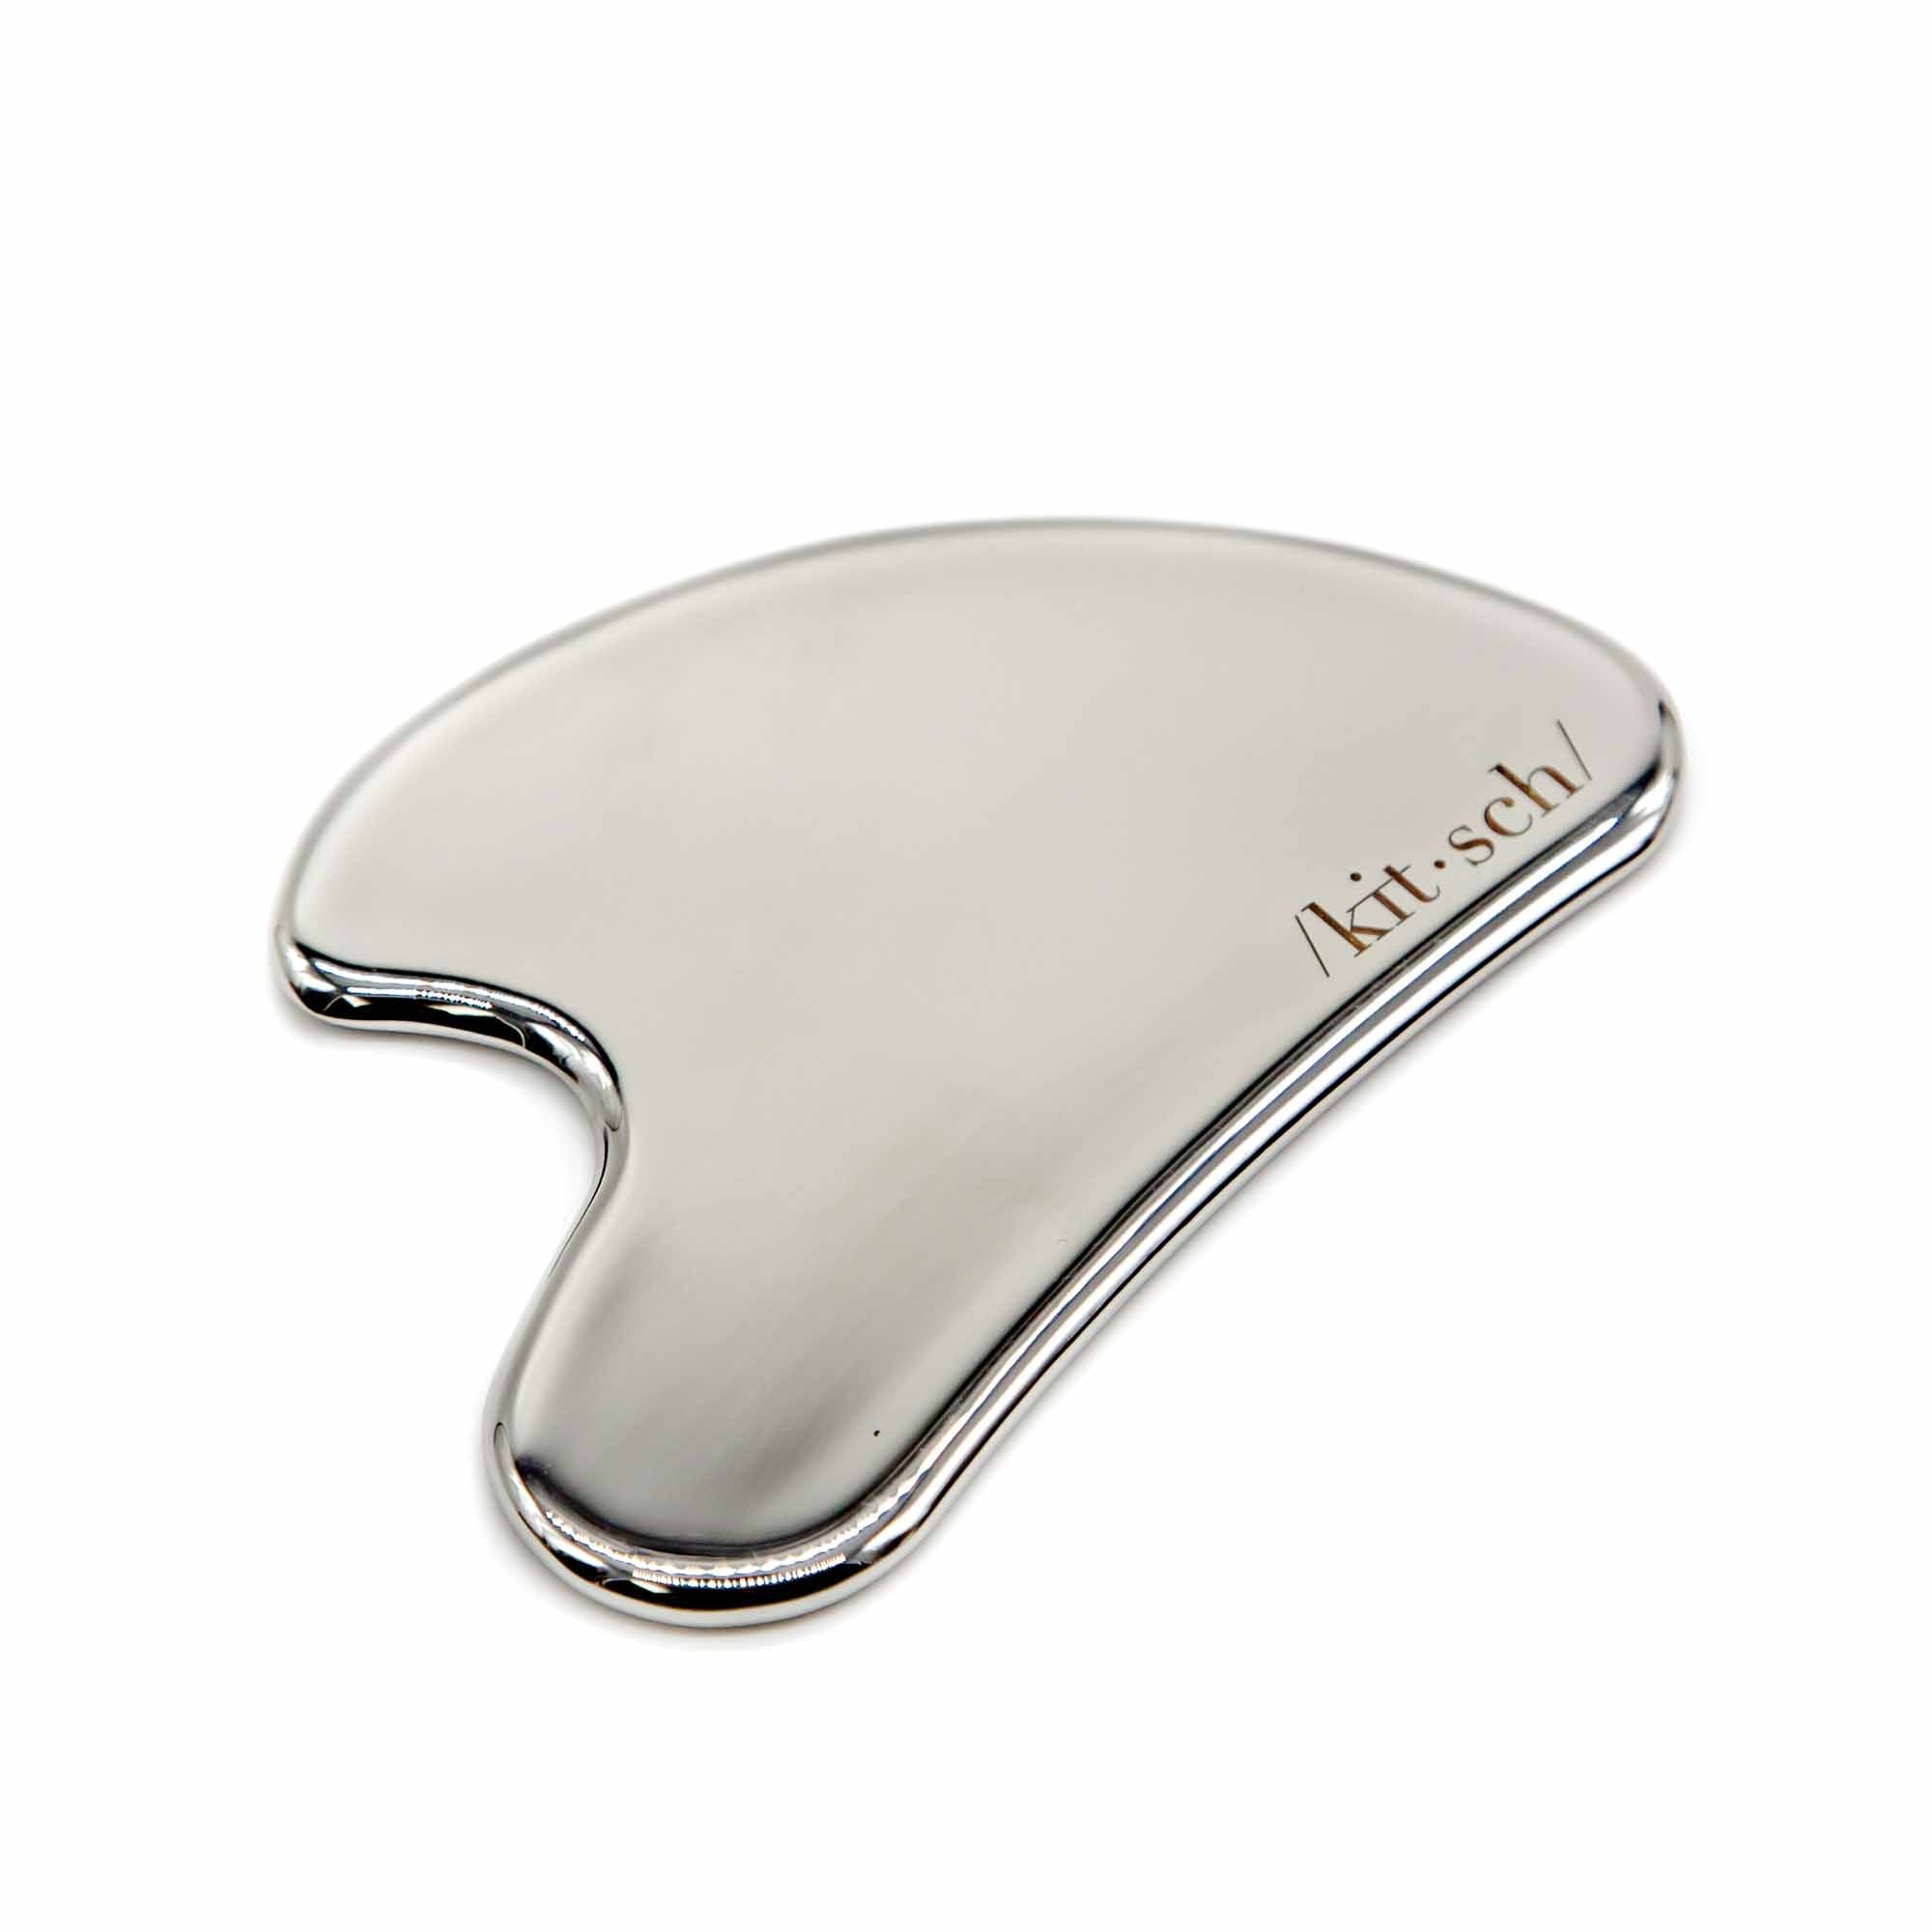 Kitsch Stainless Steel Gua Sha - Mortise And Tenon